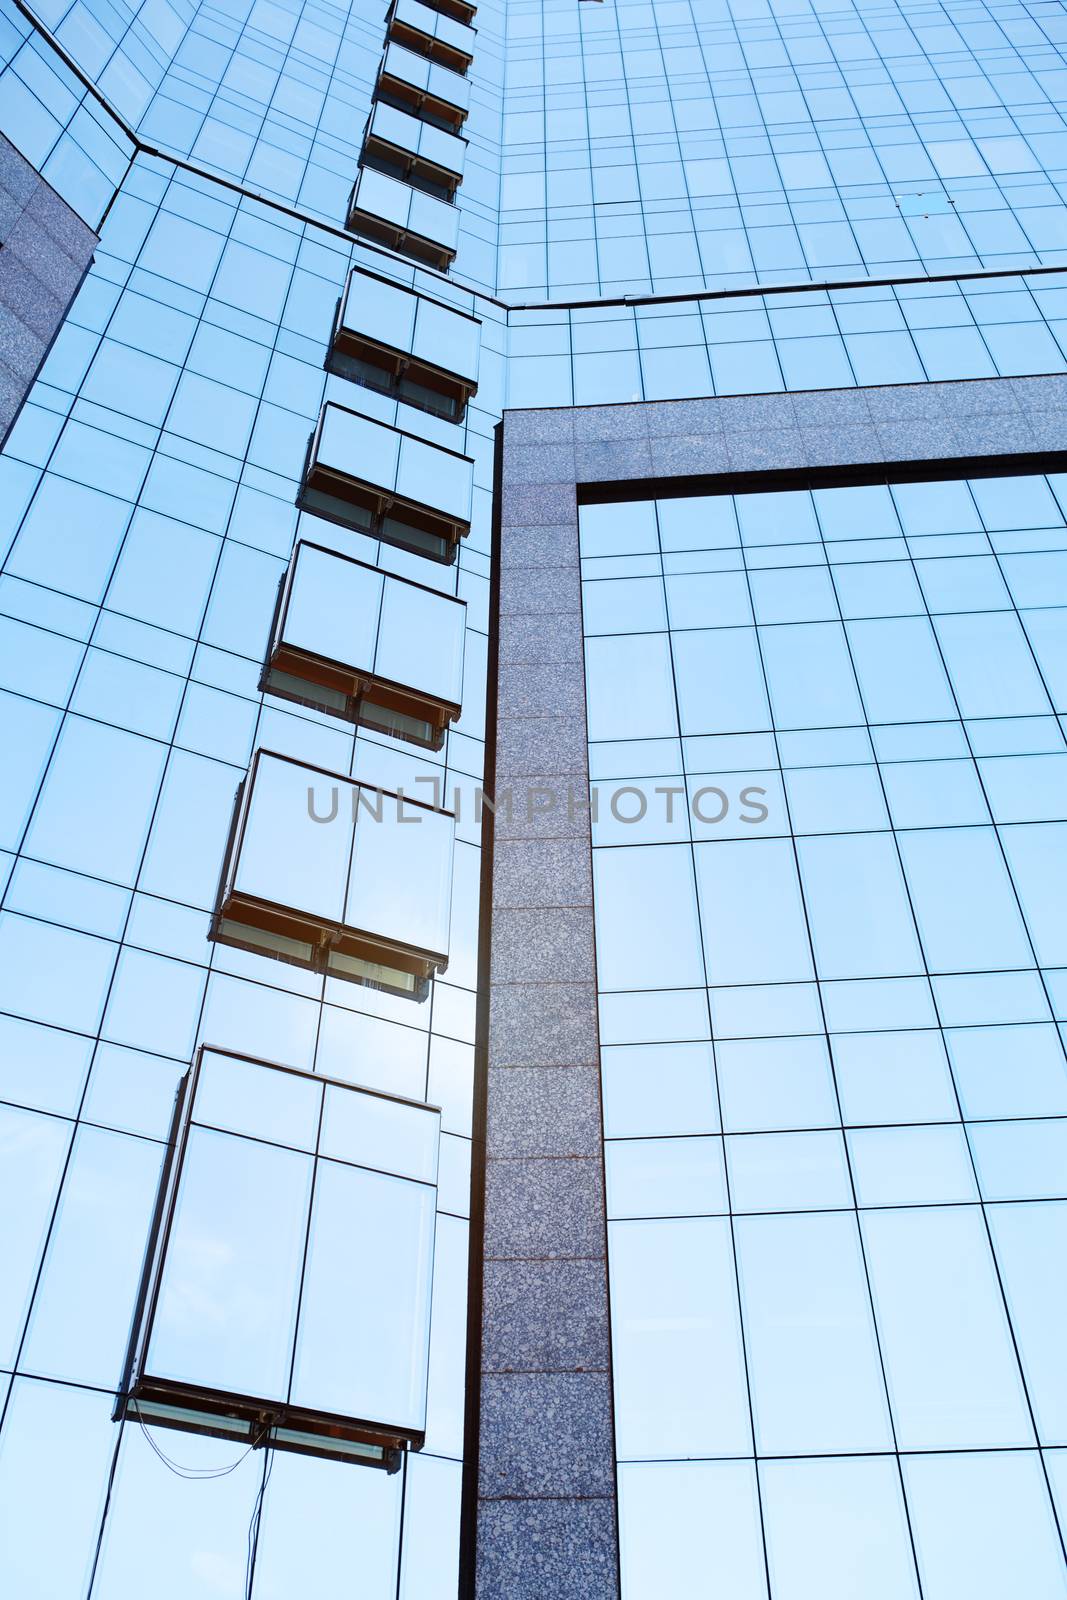 Low Angle View Of Tall Office Buildings by Novic